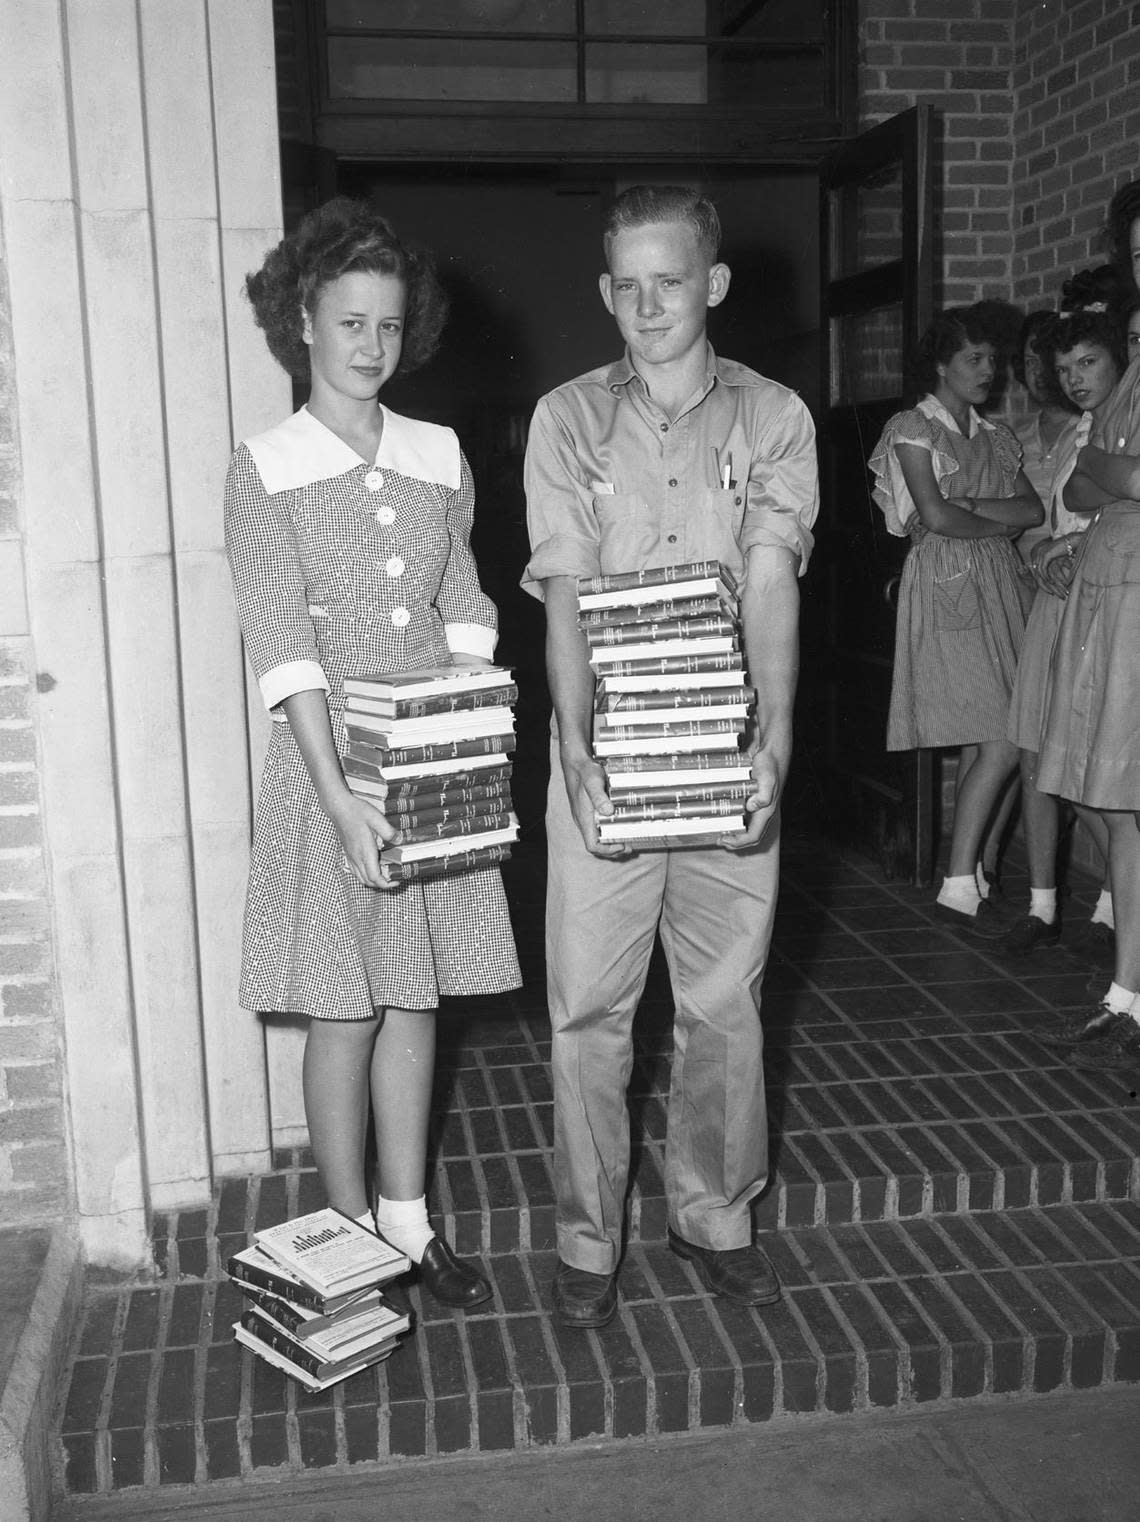 Oct. 16, 1944: Keller High School’s Jonnie Lee Carpenter, left, and Lewis Brown, just received the books needed for the United States Constitution quiz contest. The Star-Telegram paid all expenses of the contest. Fort Worth Star-Telegram archive/UT Arlington Special Collections